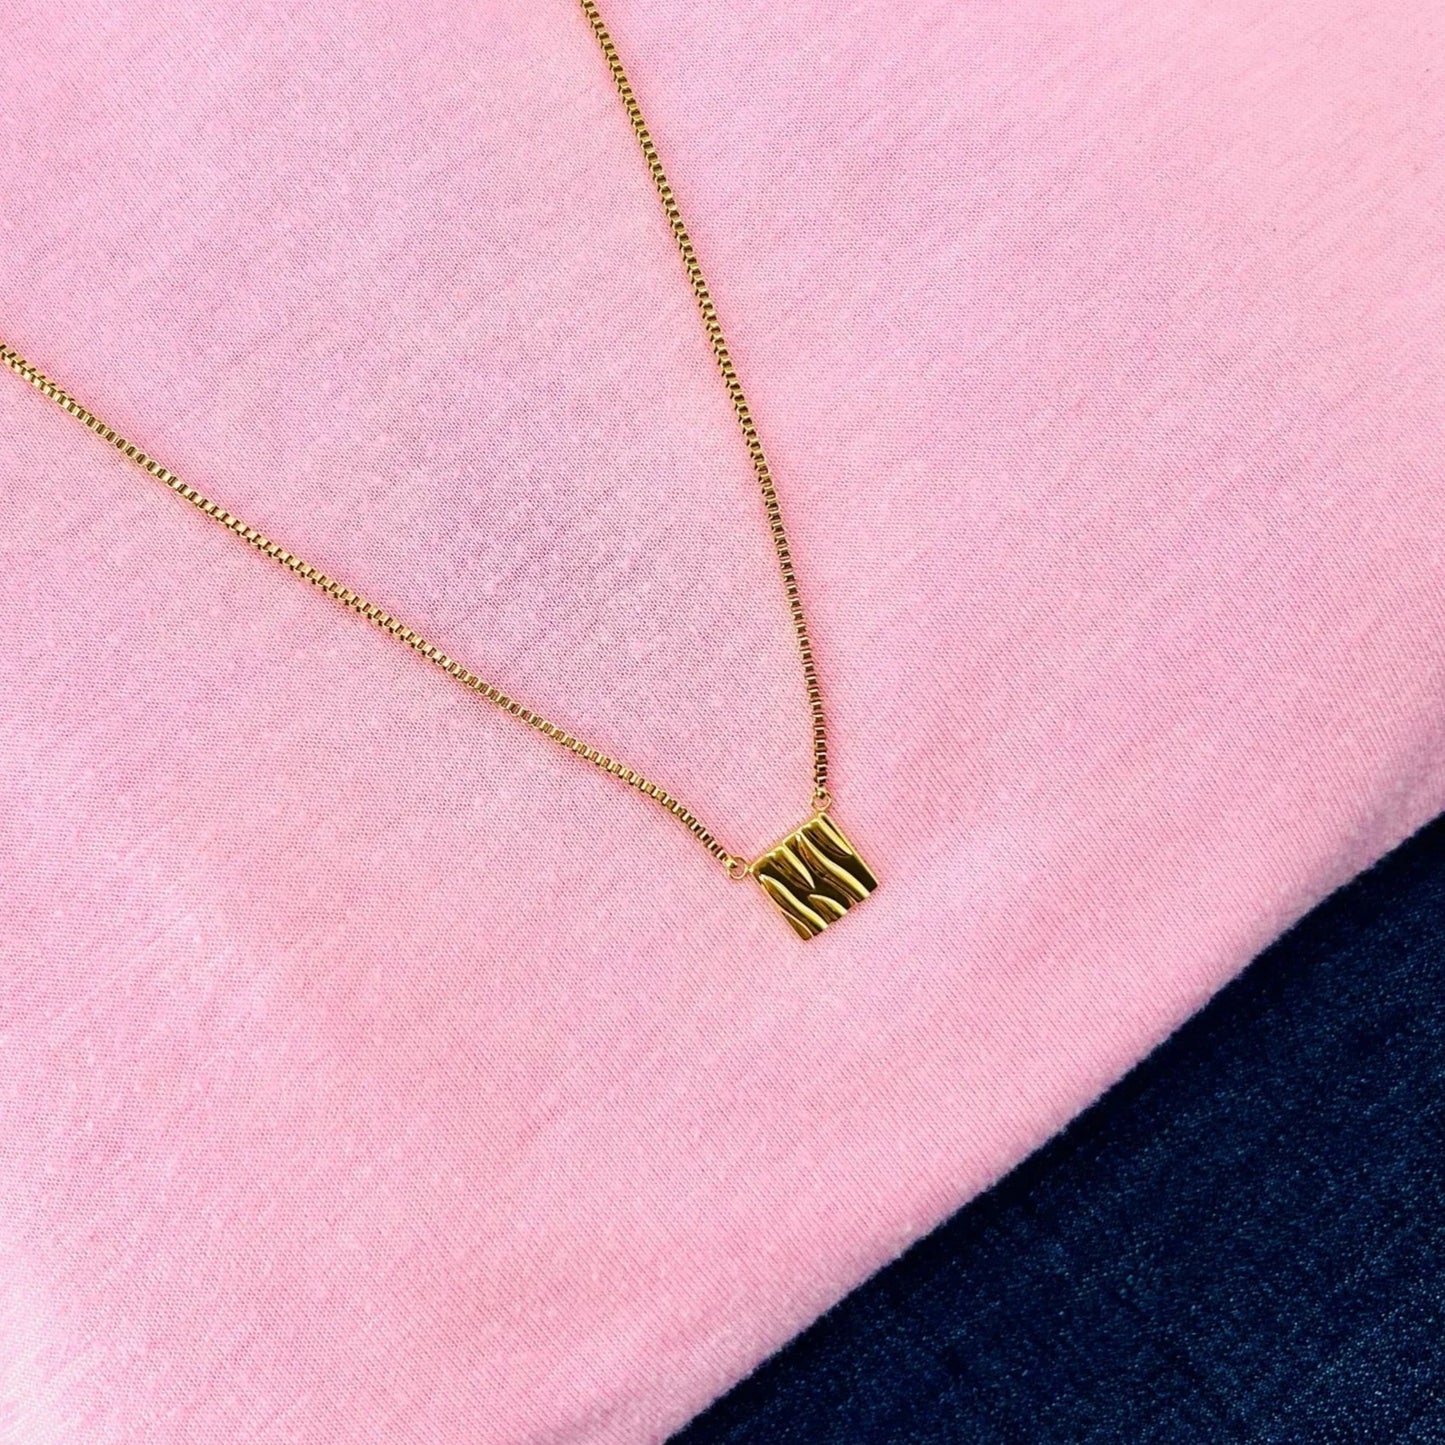 The gold square pendant on a pale pink shirt and jean, showing it's versatility with every outfit.rsatilityh 